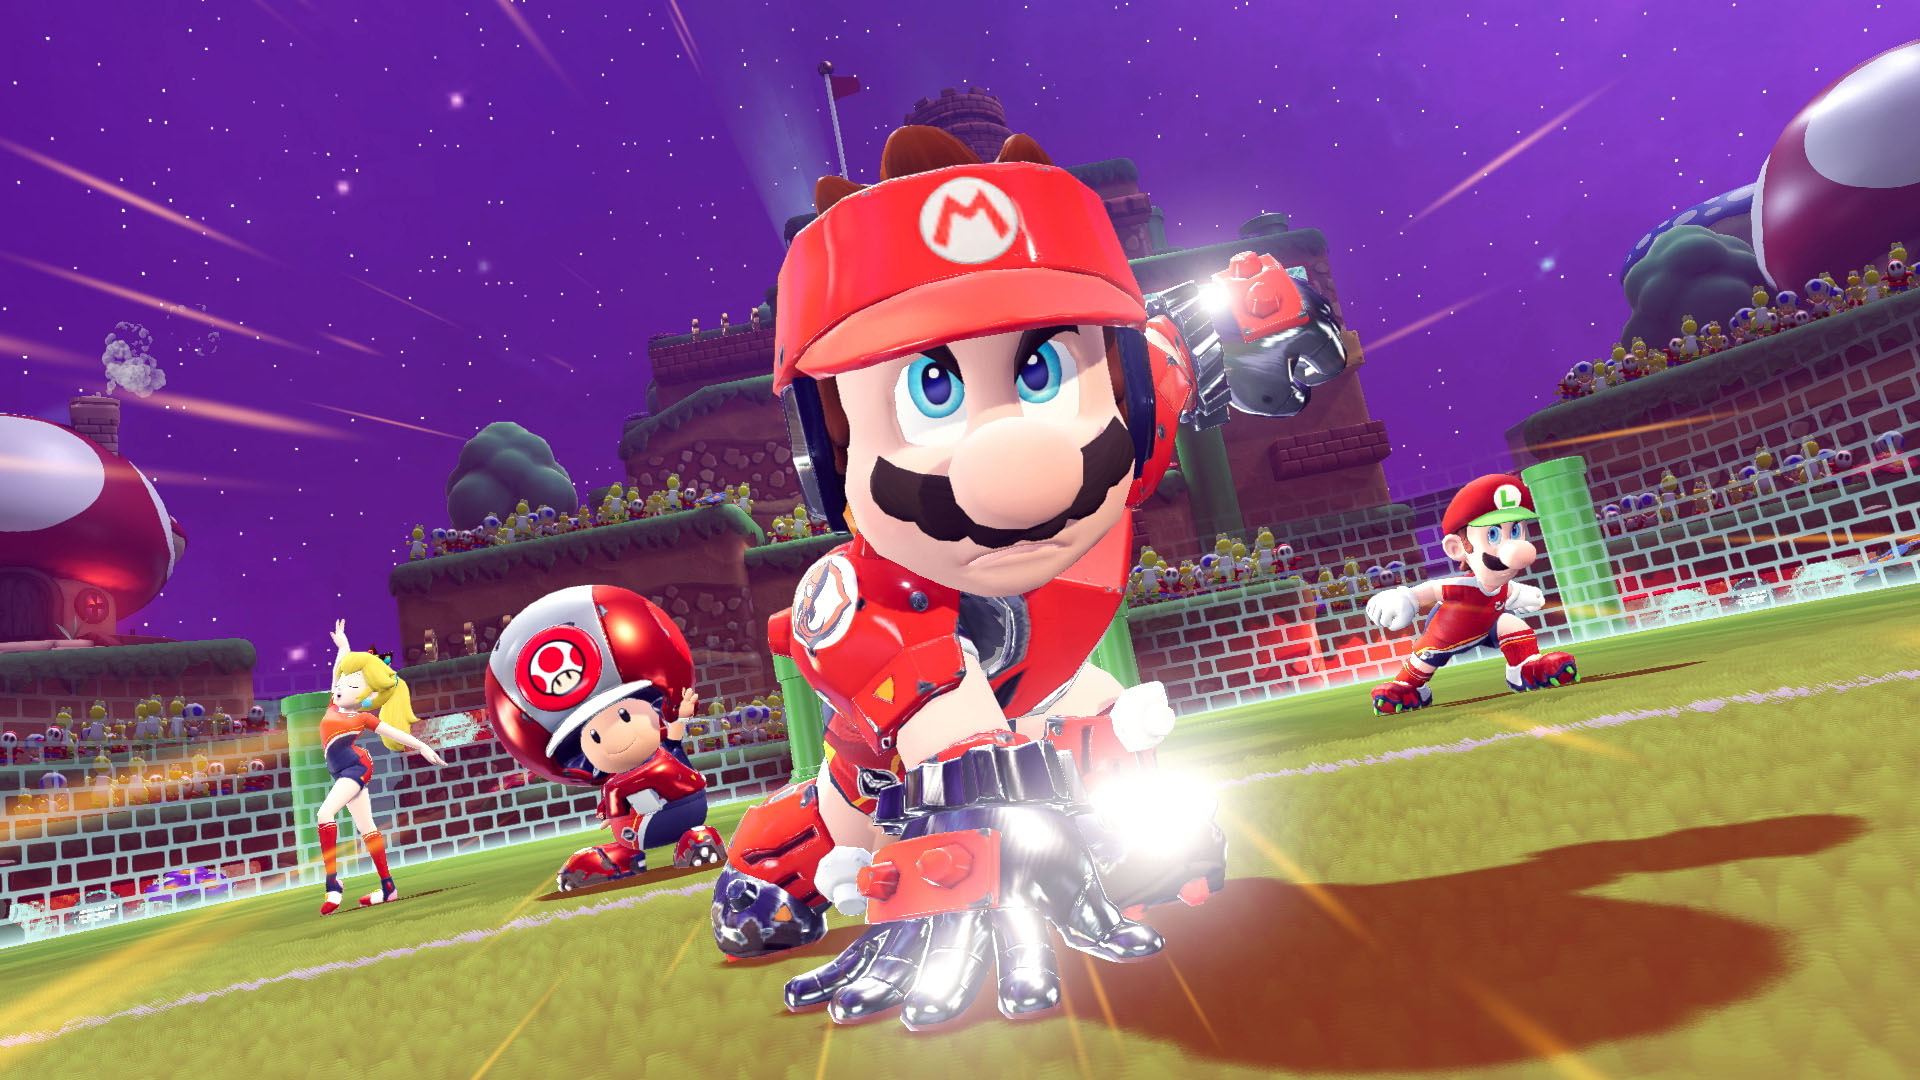 Mario charging forward on a football pitch in Mario Strikers Battle League